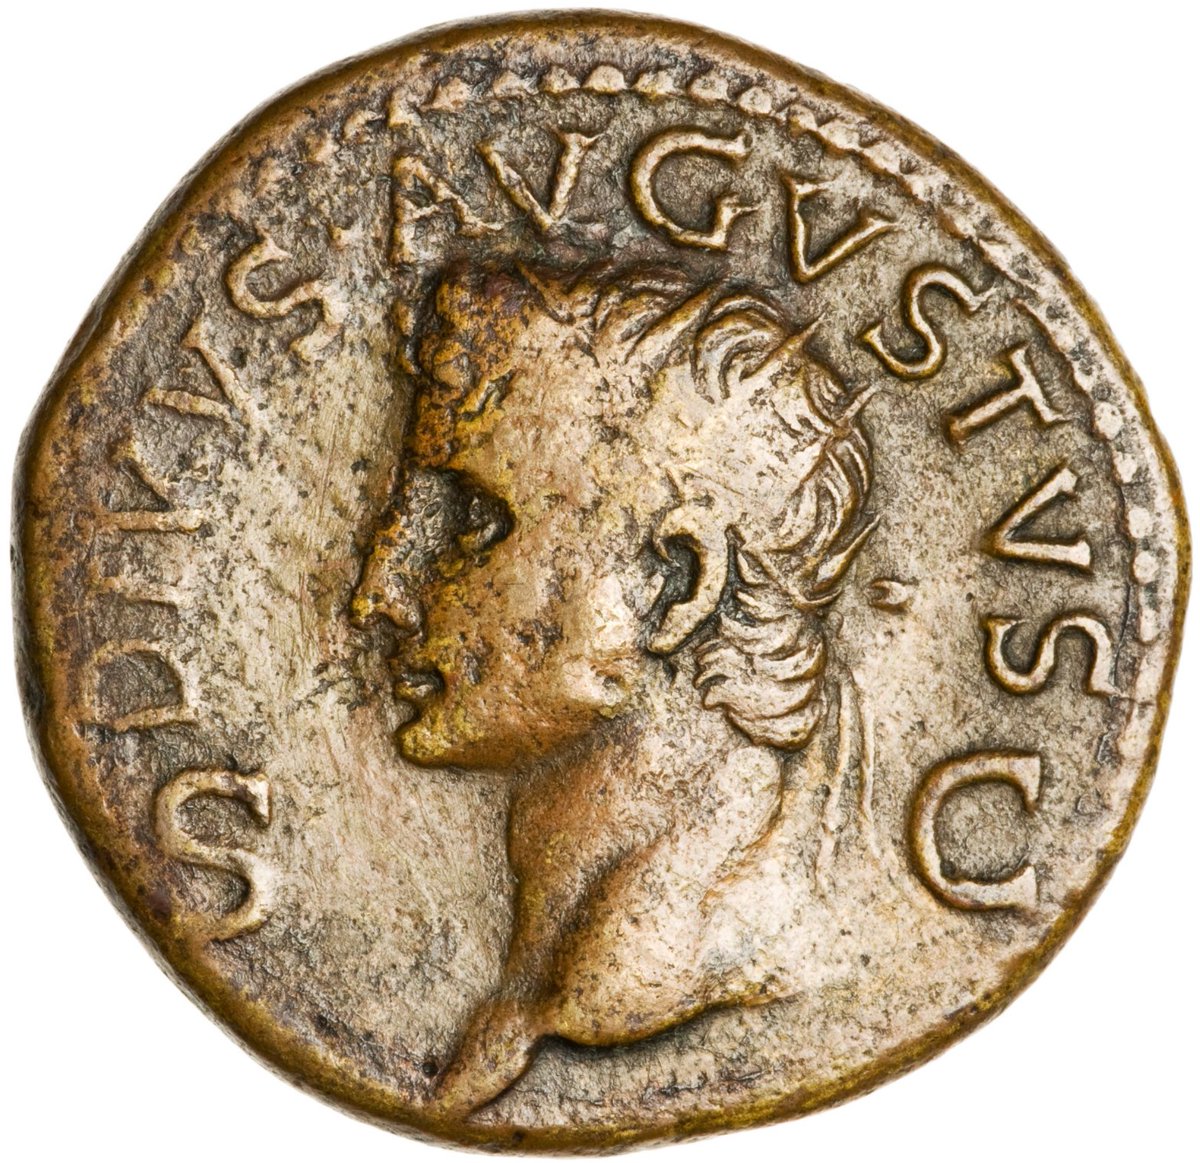 Ancient Coin of the Day: A brass dupondius of Claudius, ca. AD 41-50, commemorating the deification of Livia, the wife of Augustus and grandmother of Claudius.  #ACOTD  #Livia Image: RIC Claudius 101; ANS 1978.27.5. Link -  http://numismatics.org/collection/1978.27.5